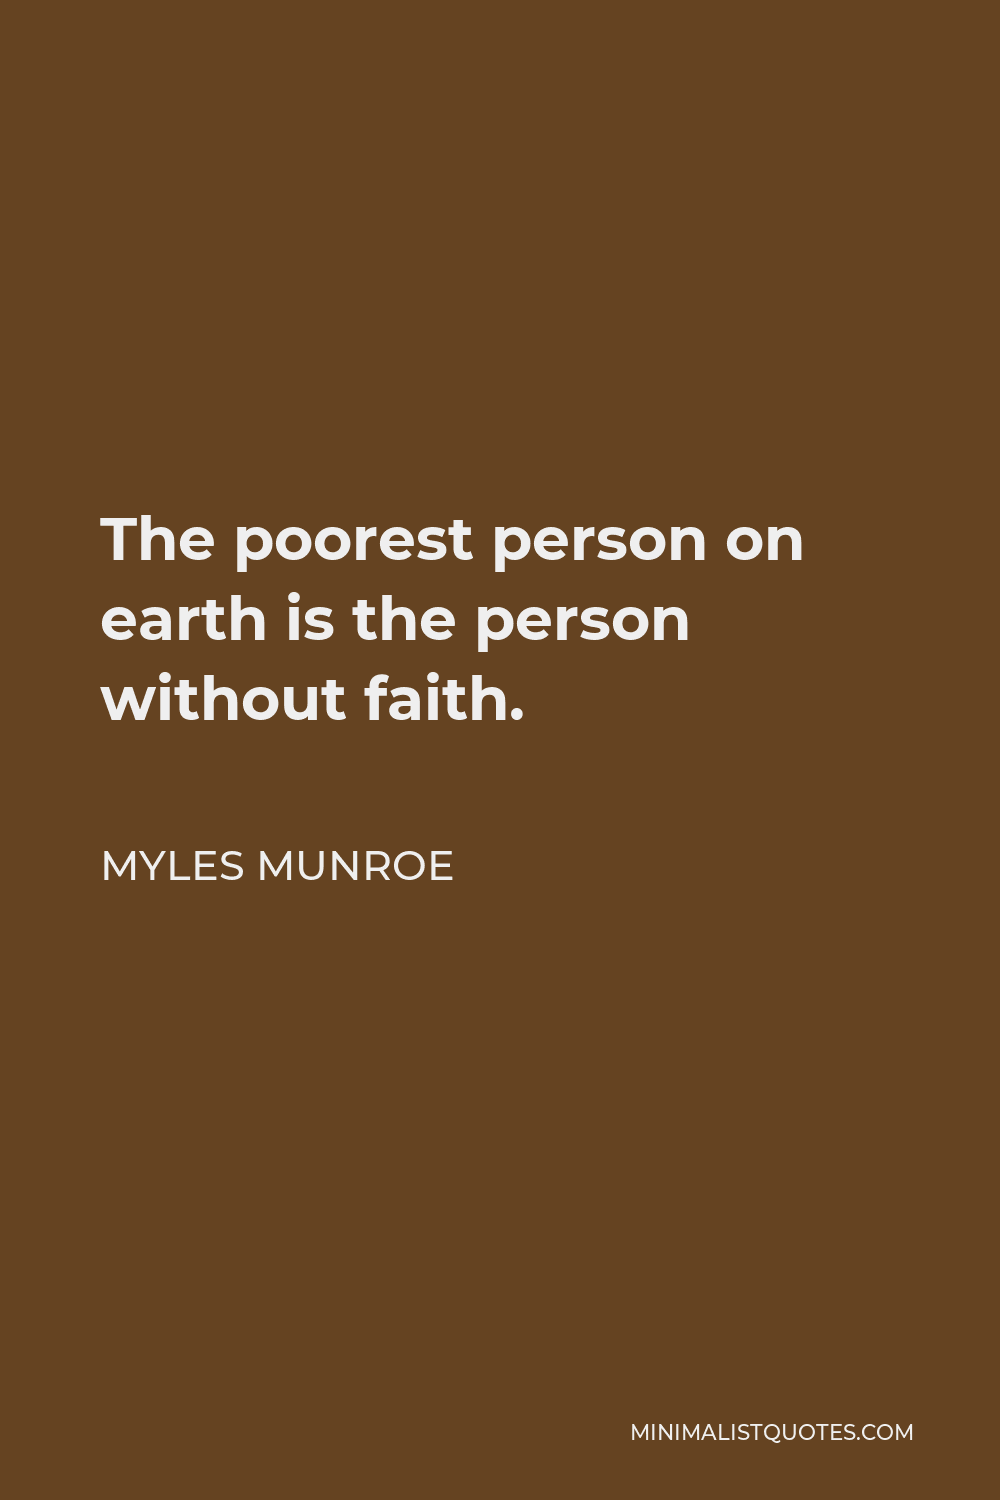 Myles Munroe Quote - The poorest person on earth is the person without faith.